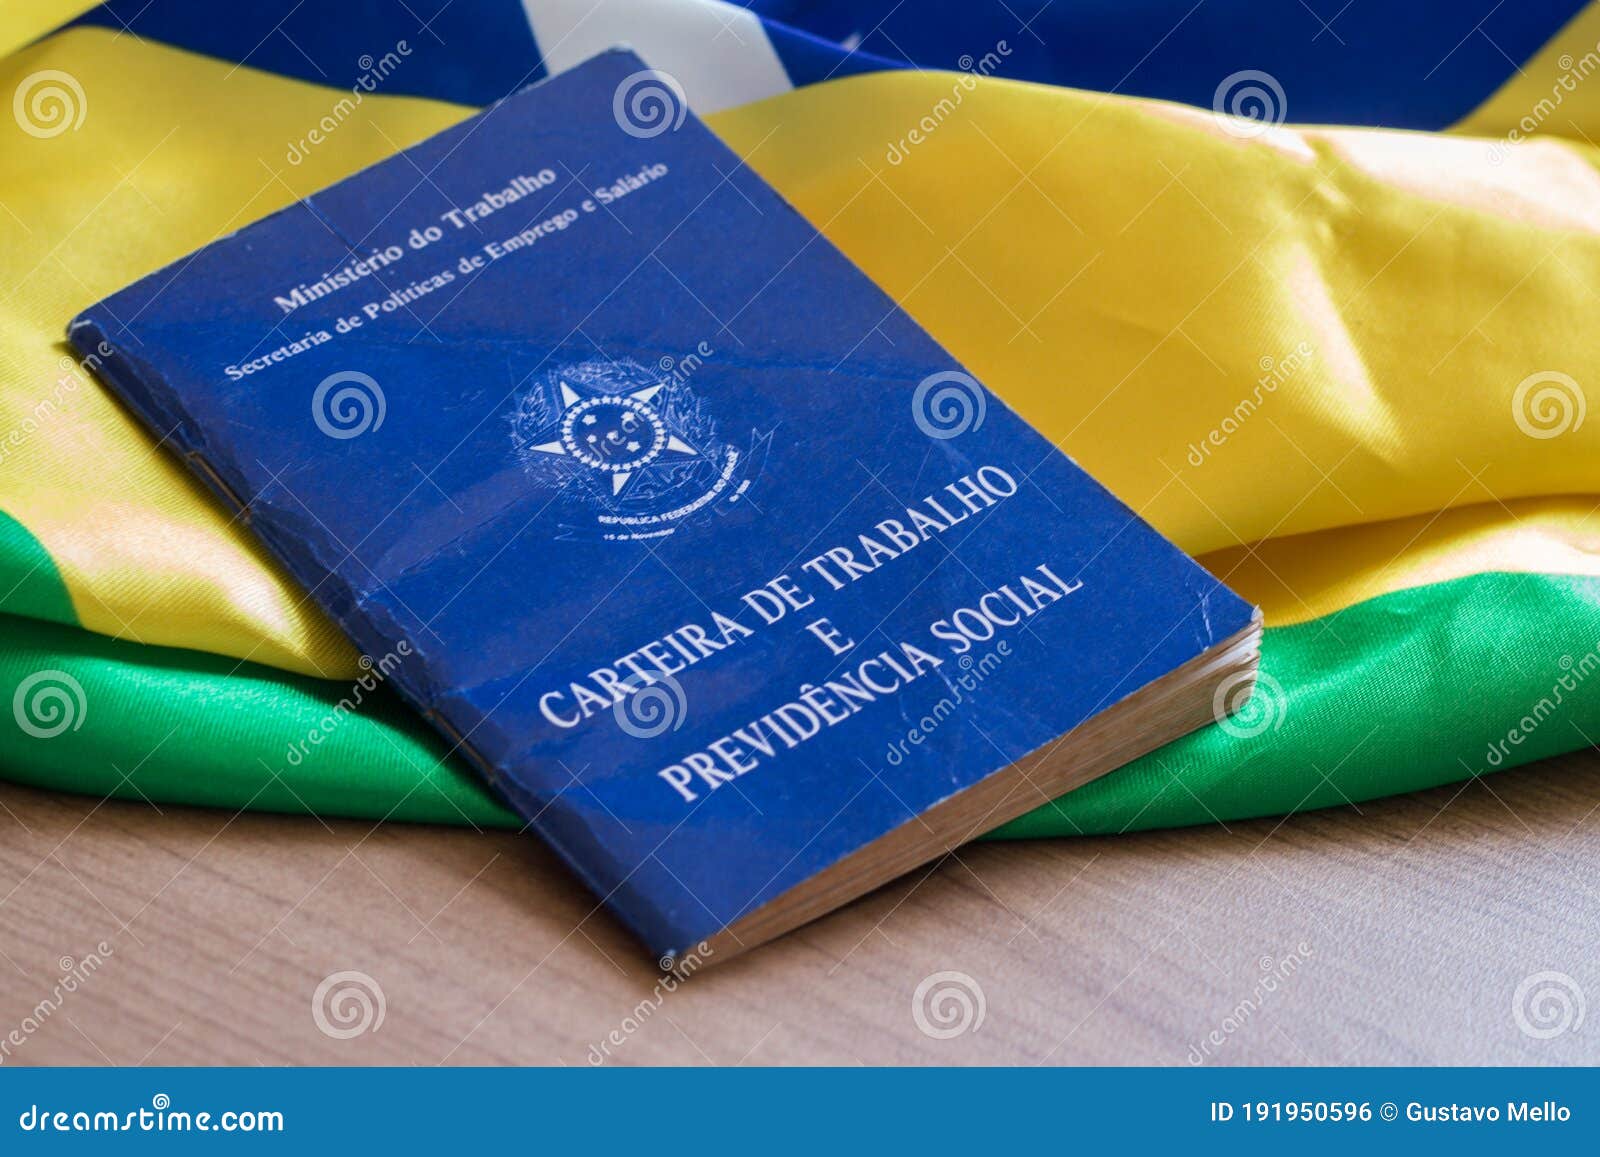 brazilian work card. written `work and social security card` in portuguese.